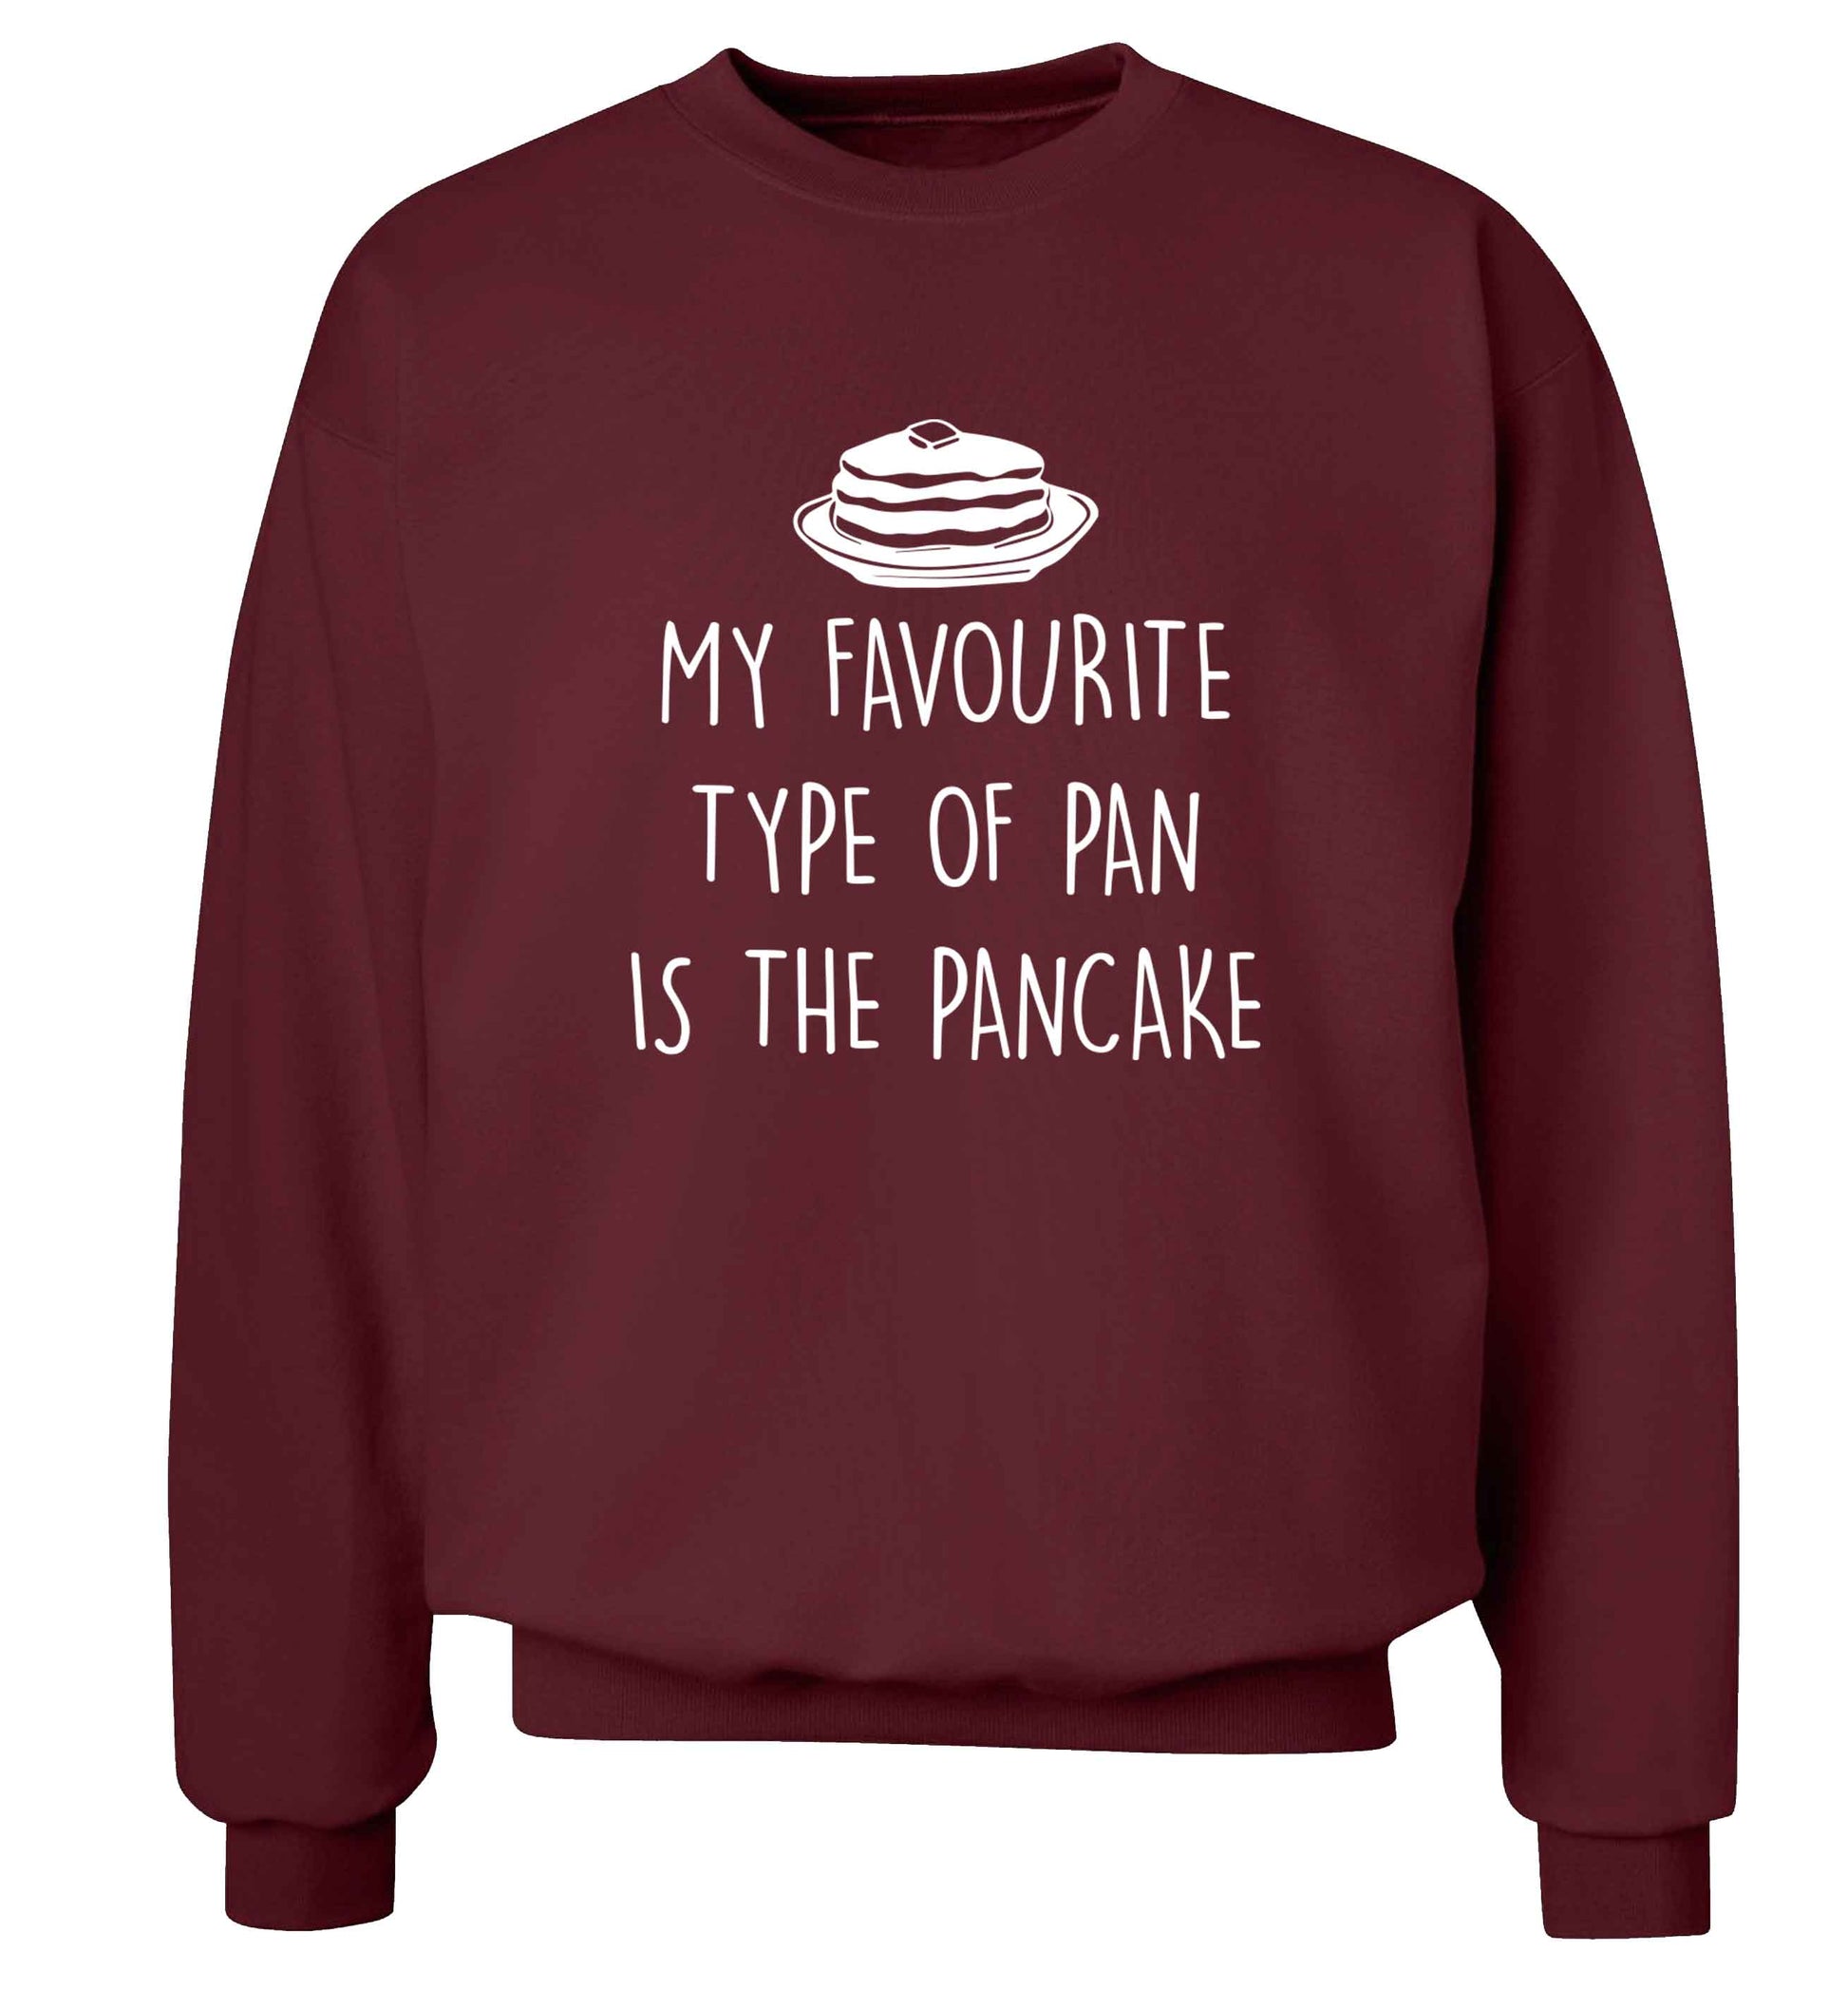 My favourite type of pan is the pancake adult's unisex maroon sweater 2XL